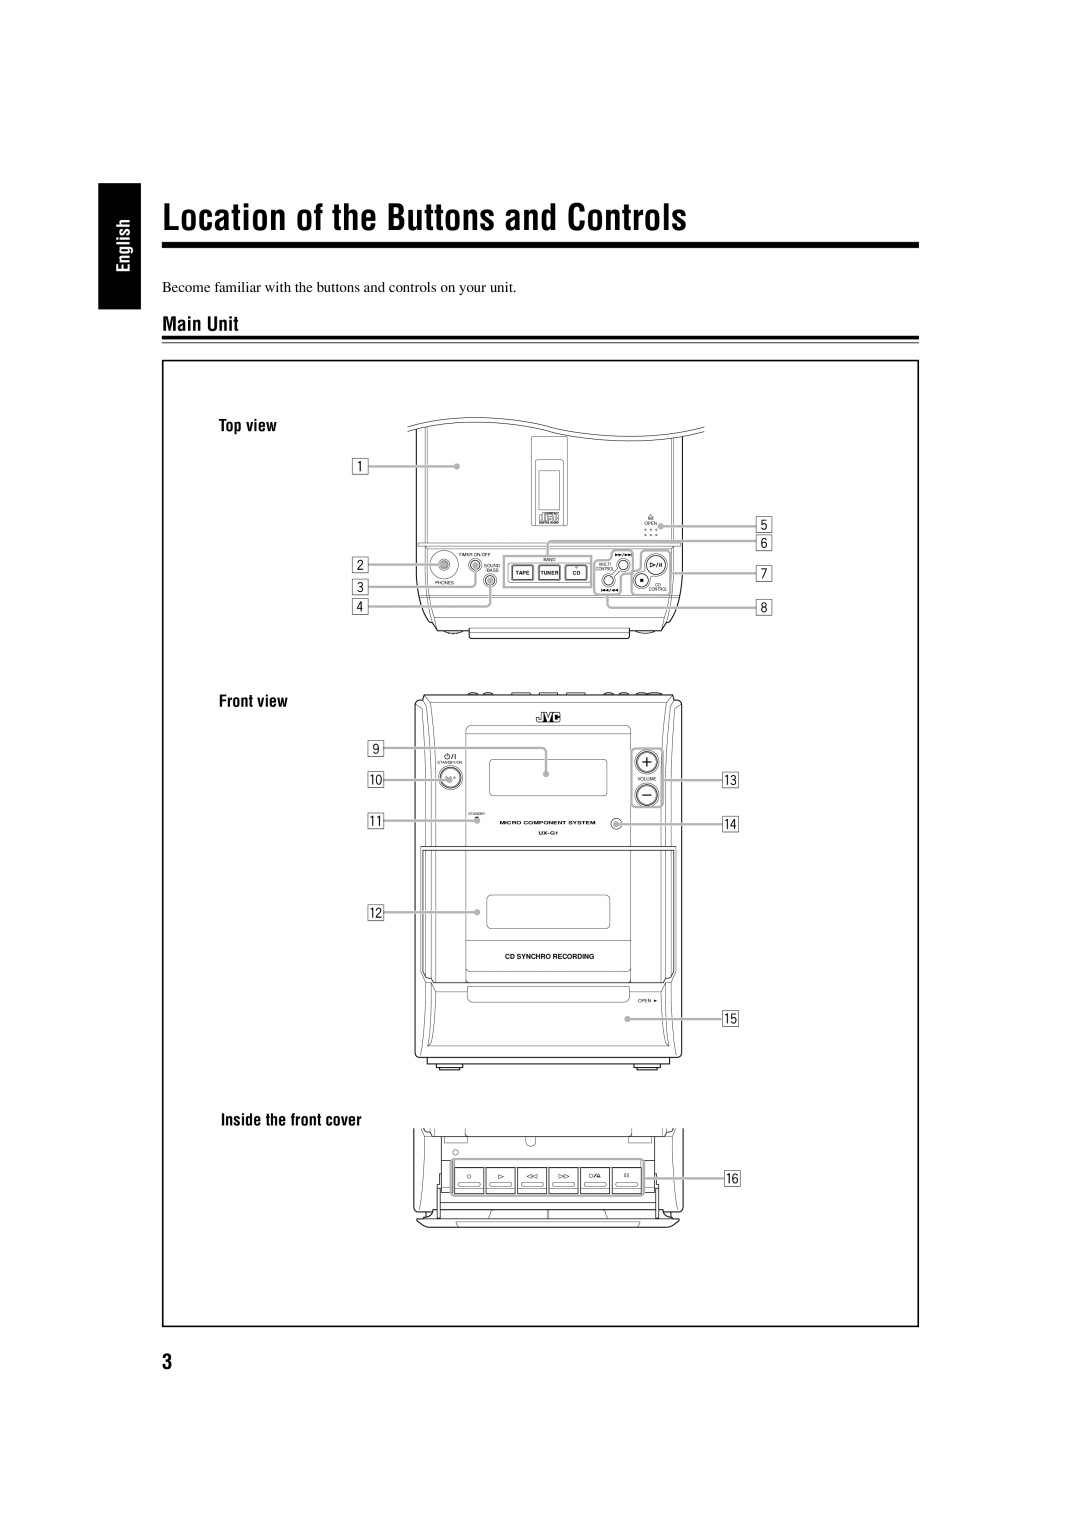 JVC LVT1356-005A manual Location of the Buttons and Controls, Main Unit, English 